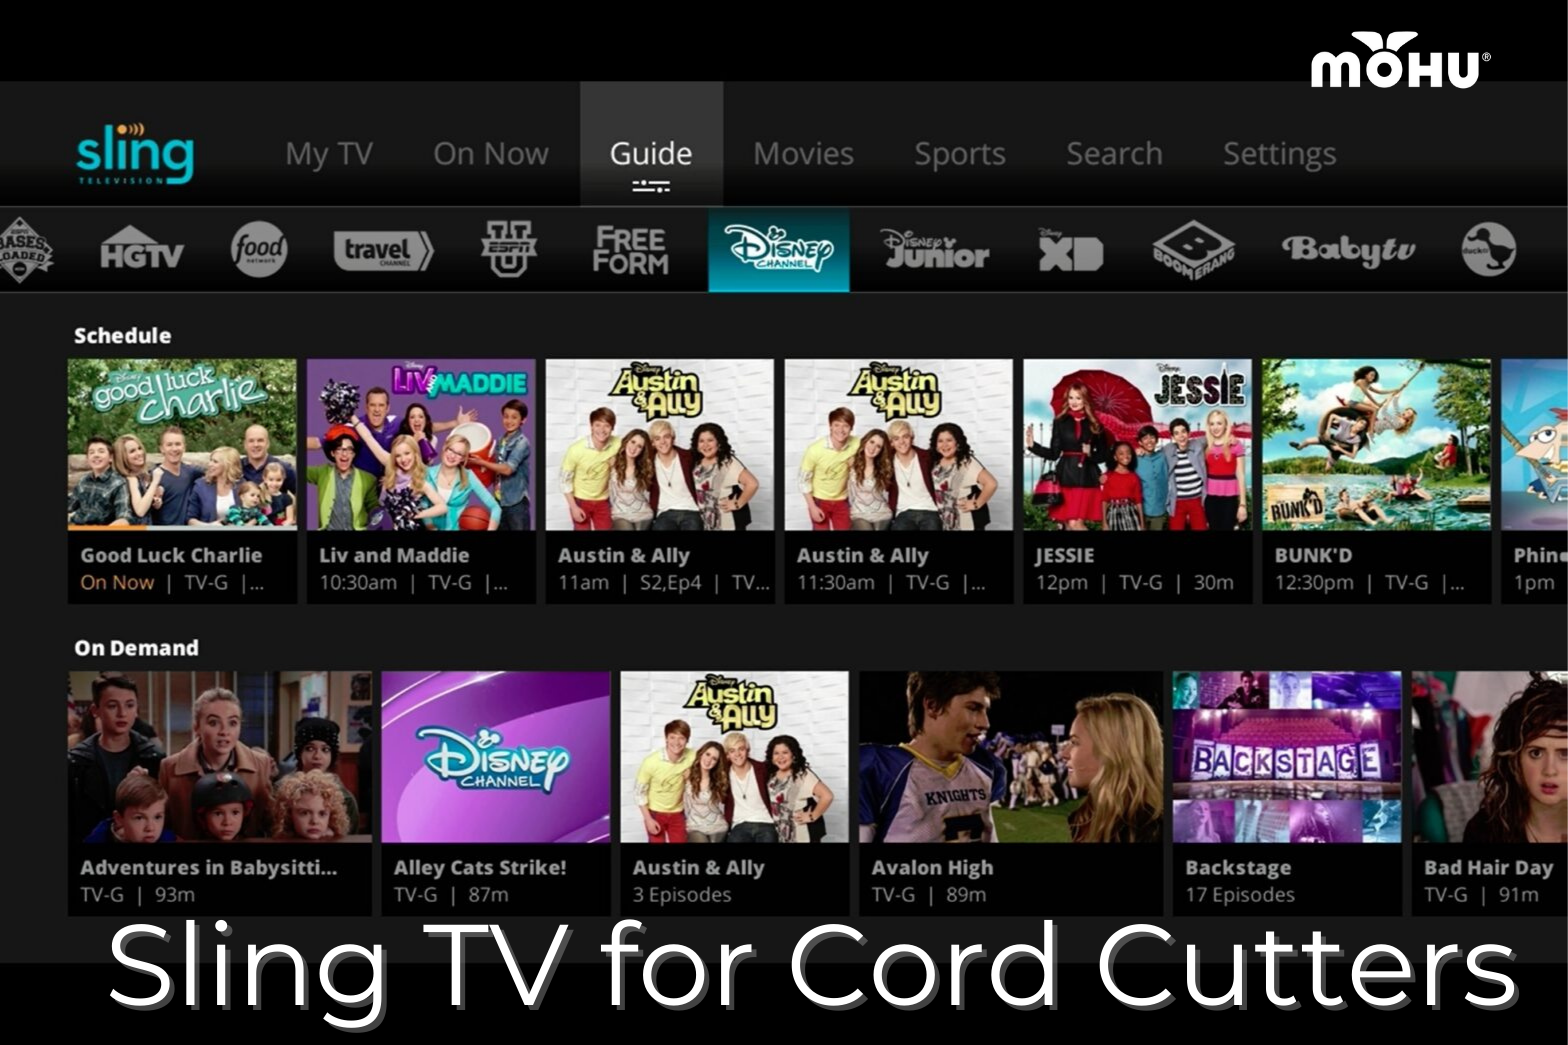 Sling TV Guide screen with copy "Sling TV for Cord Cutters"